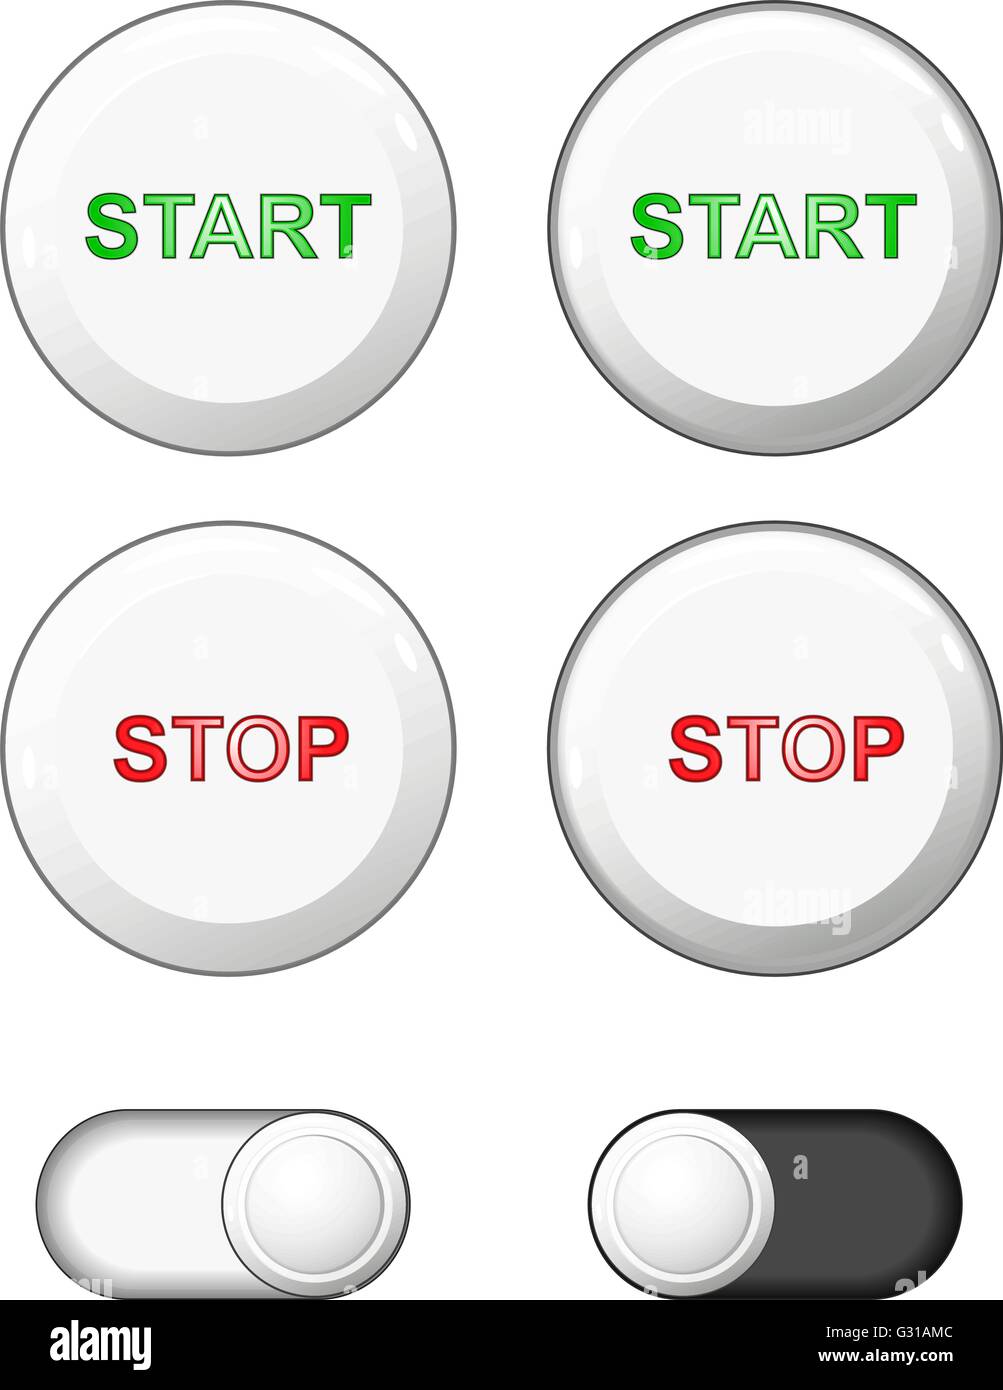 Vector. Set of buttons. White plastic round solid buttons. Web buttons icons for internet: start button, stop button, slide Stock Vector